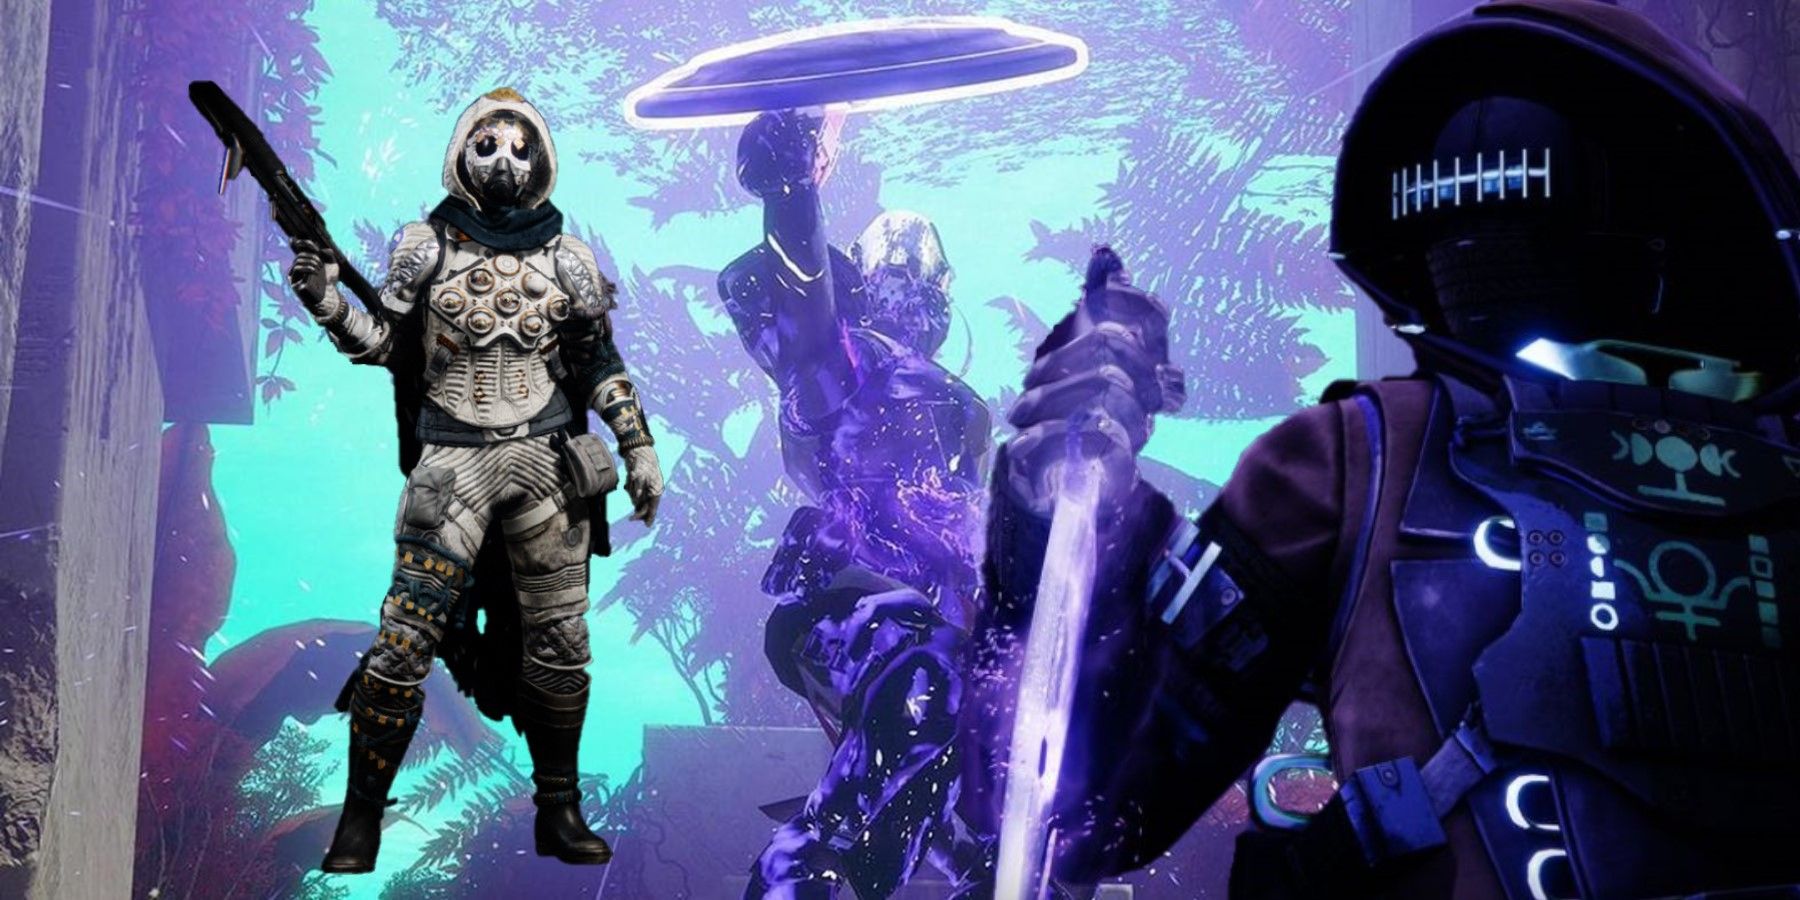 destiny 2 the witch queen expansion void 3.0 update subclass rework titan hunter warlock bungie devs nerf hunter heart of the pack omnioculus and titan ward of dawn weapons of light